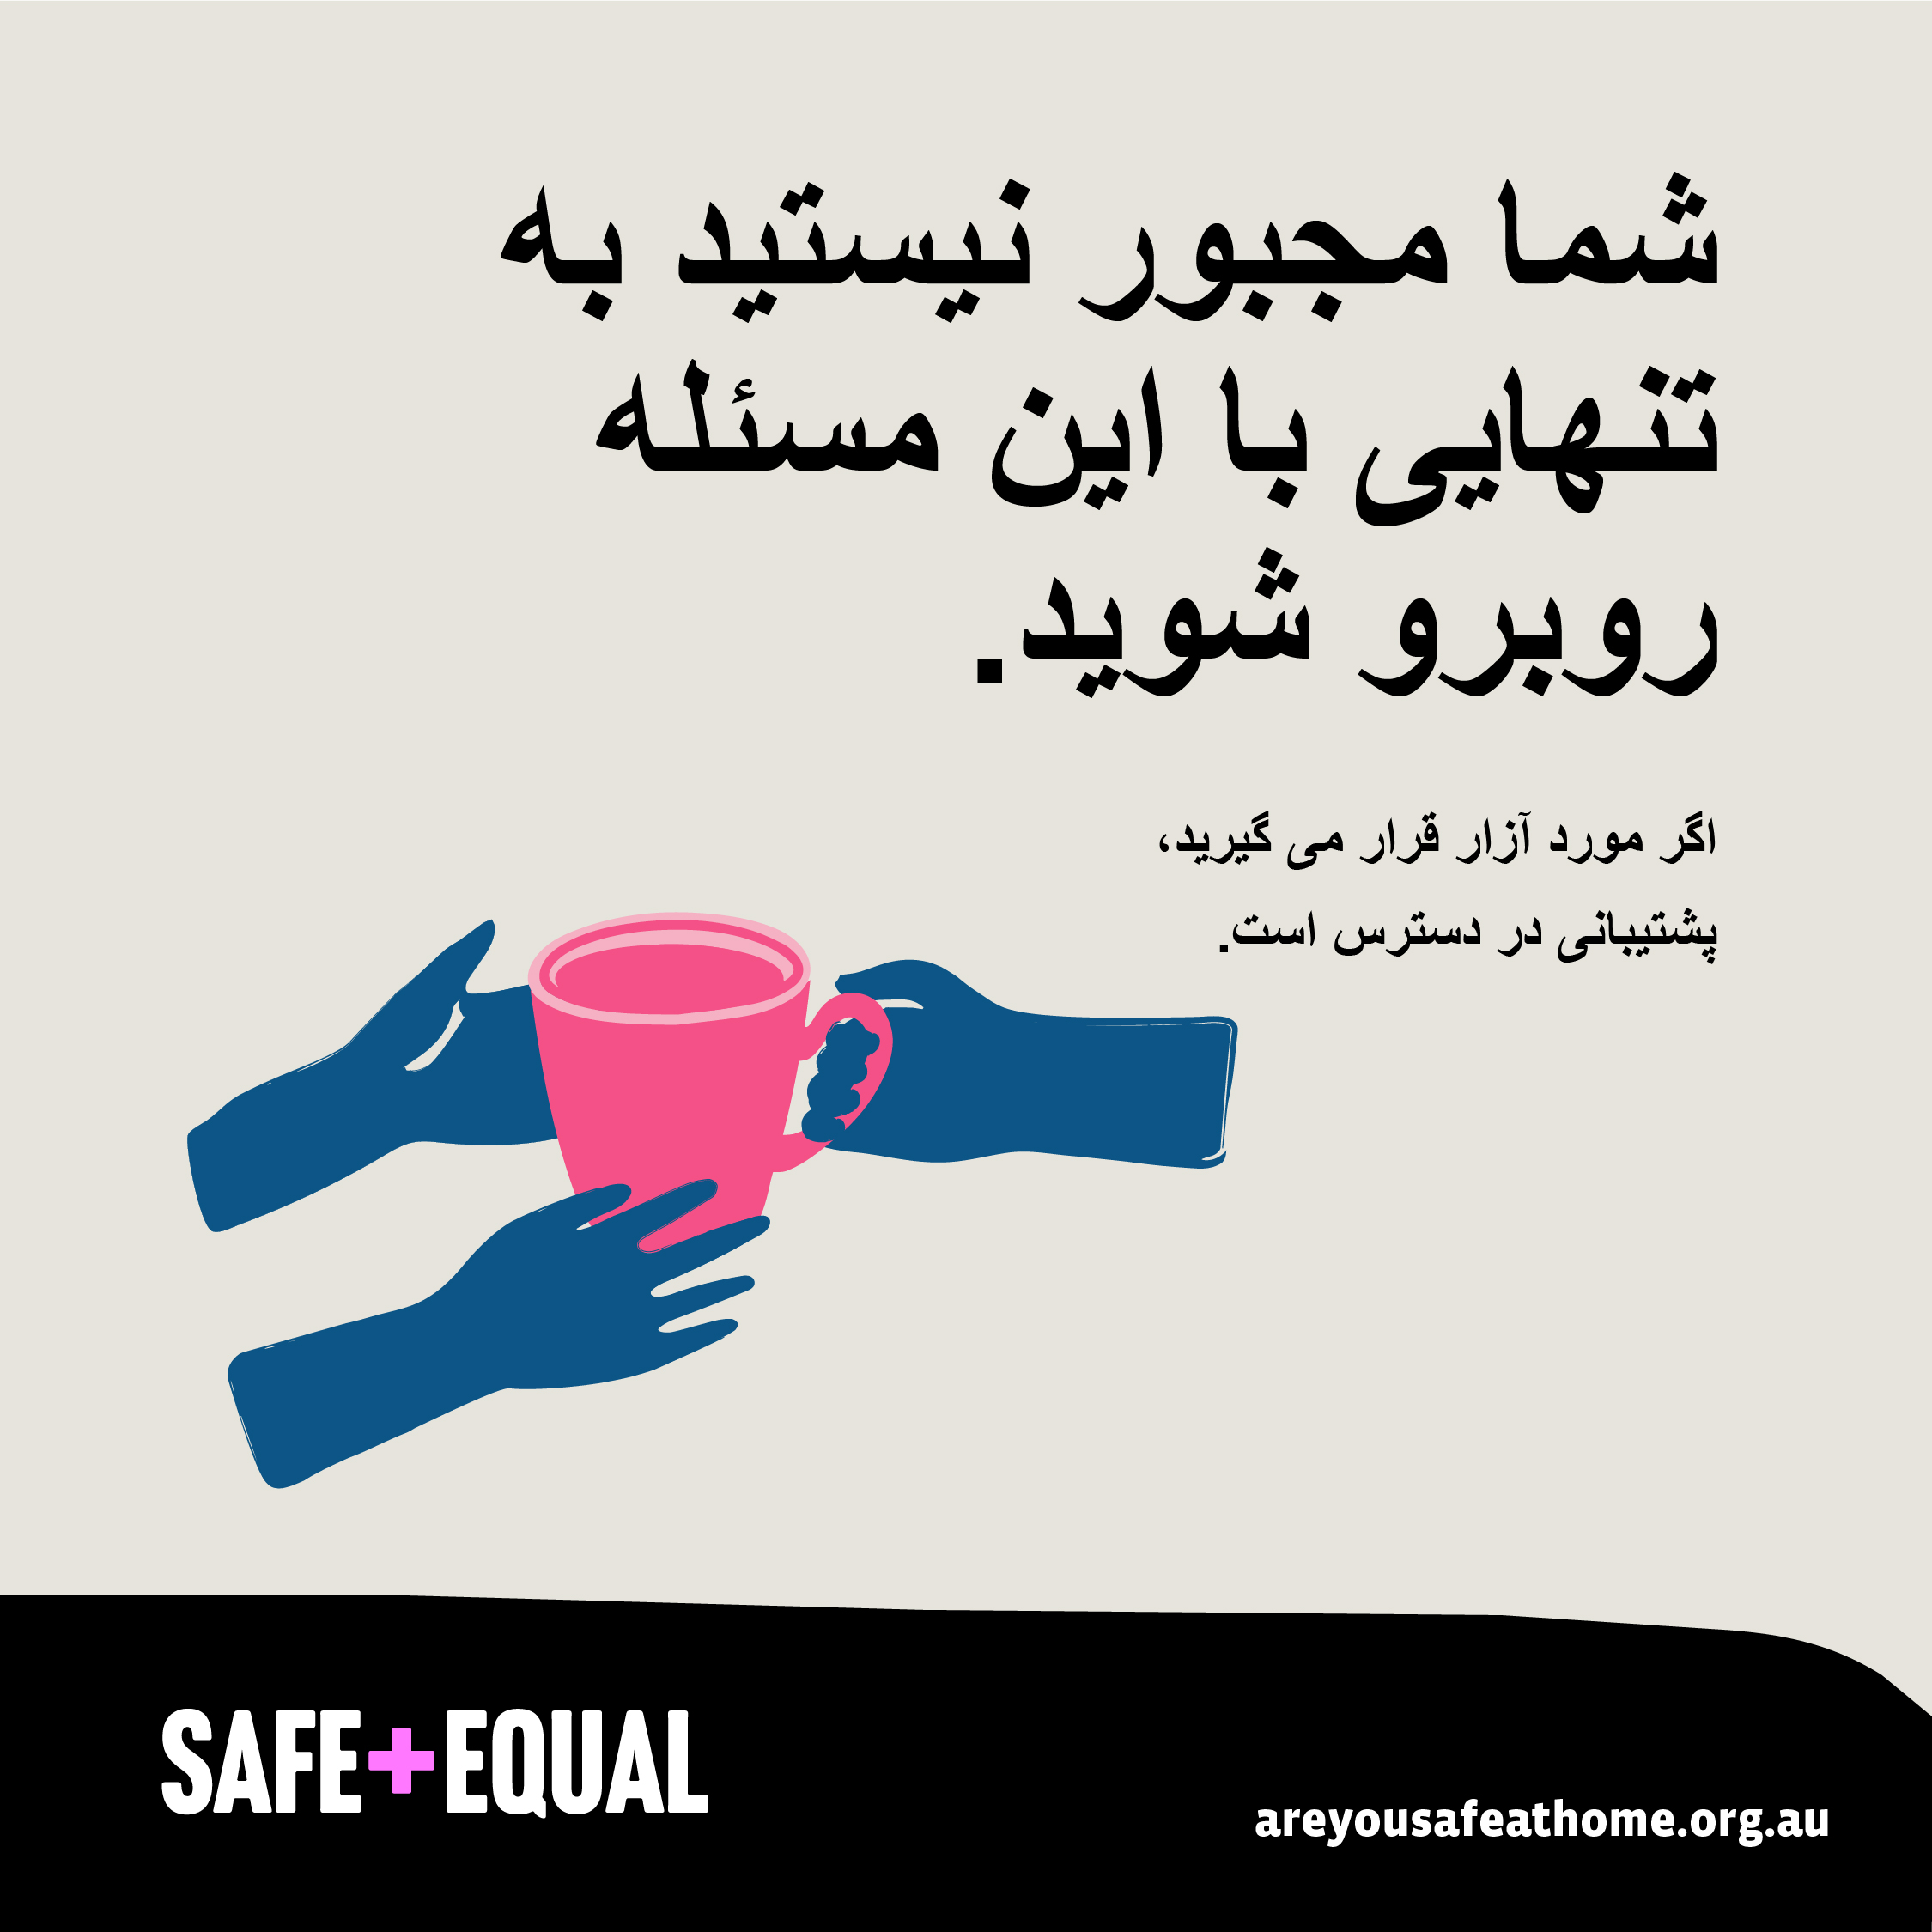 Social media tile for Are you safe at home translated into Farsi